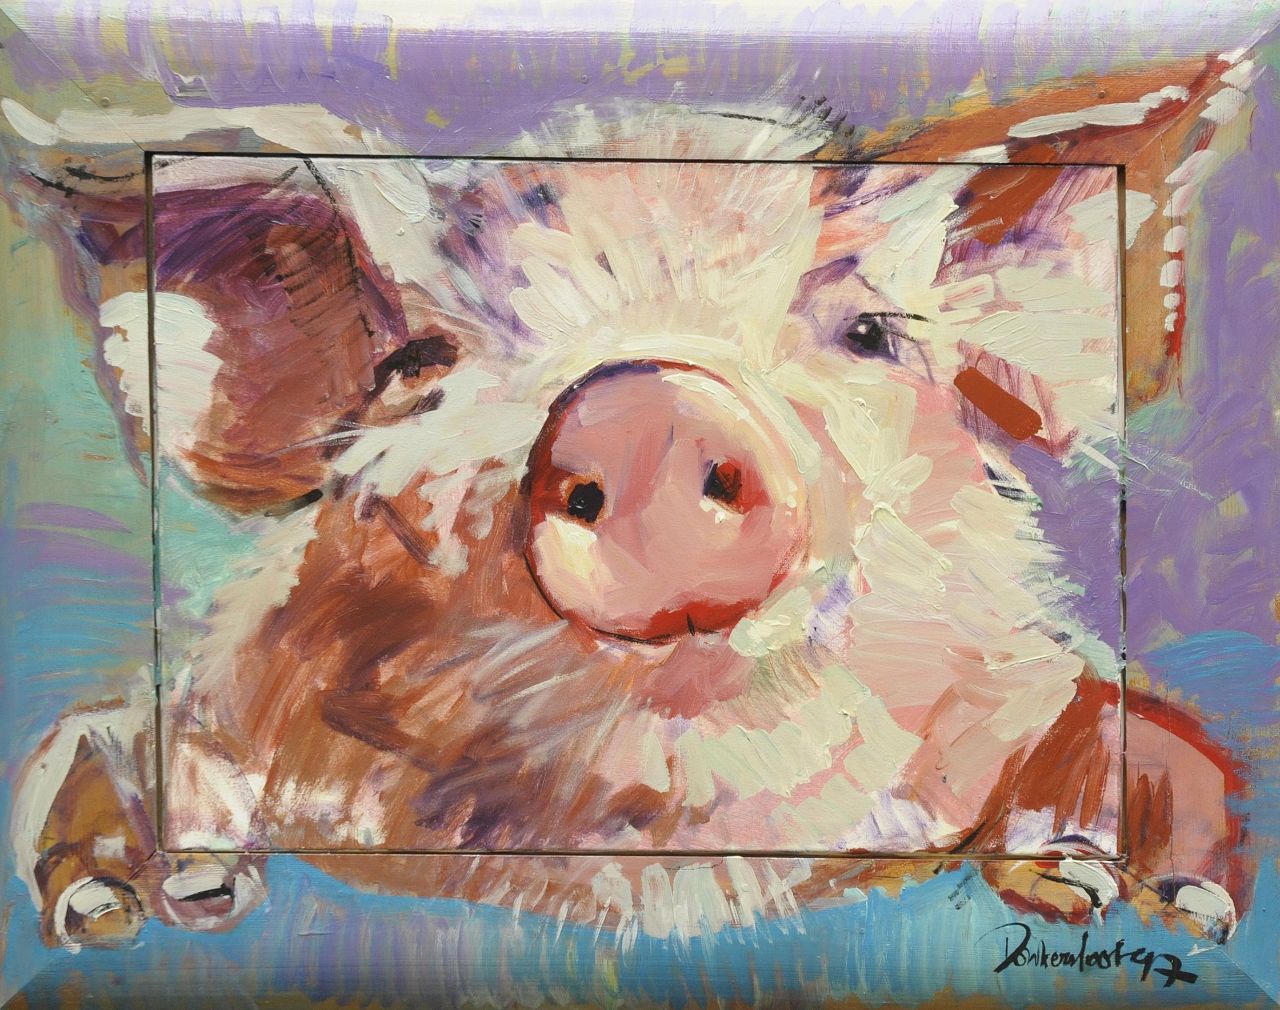 Donkersloot P.  | Peter Donkersloot, Pig, oil on canvas 61.7 x 85.1 cm, signed l.r. and dated '97